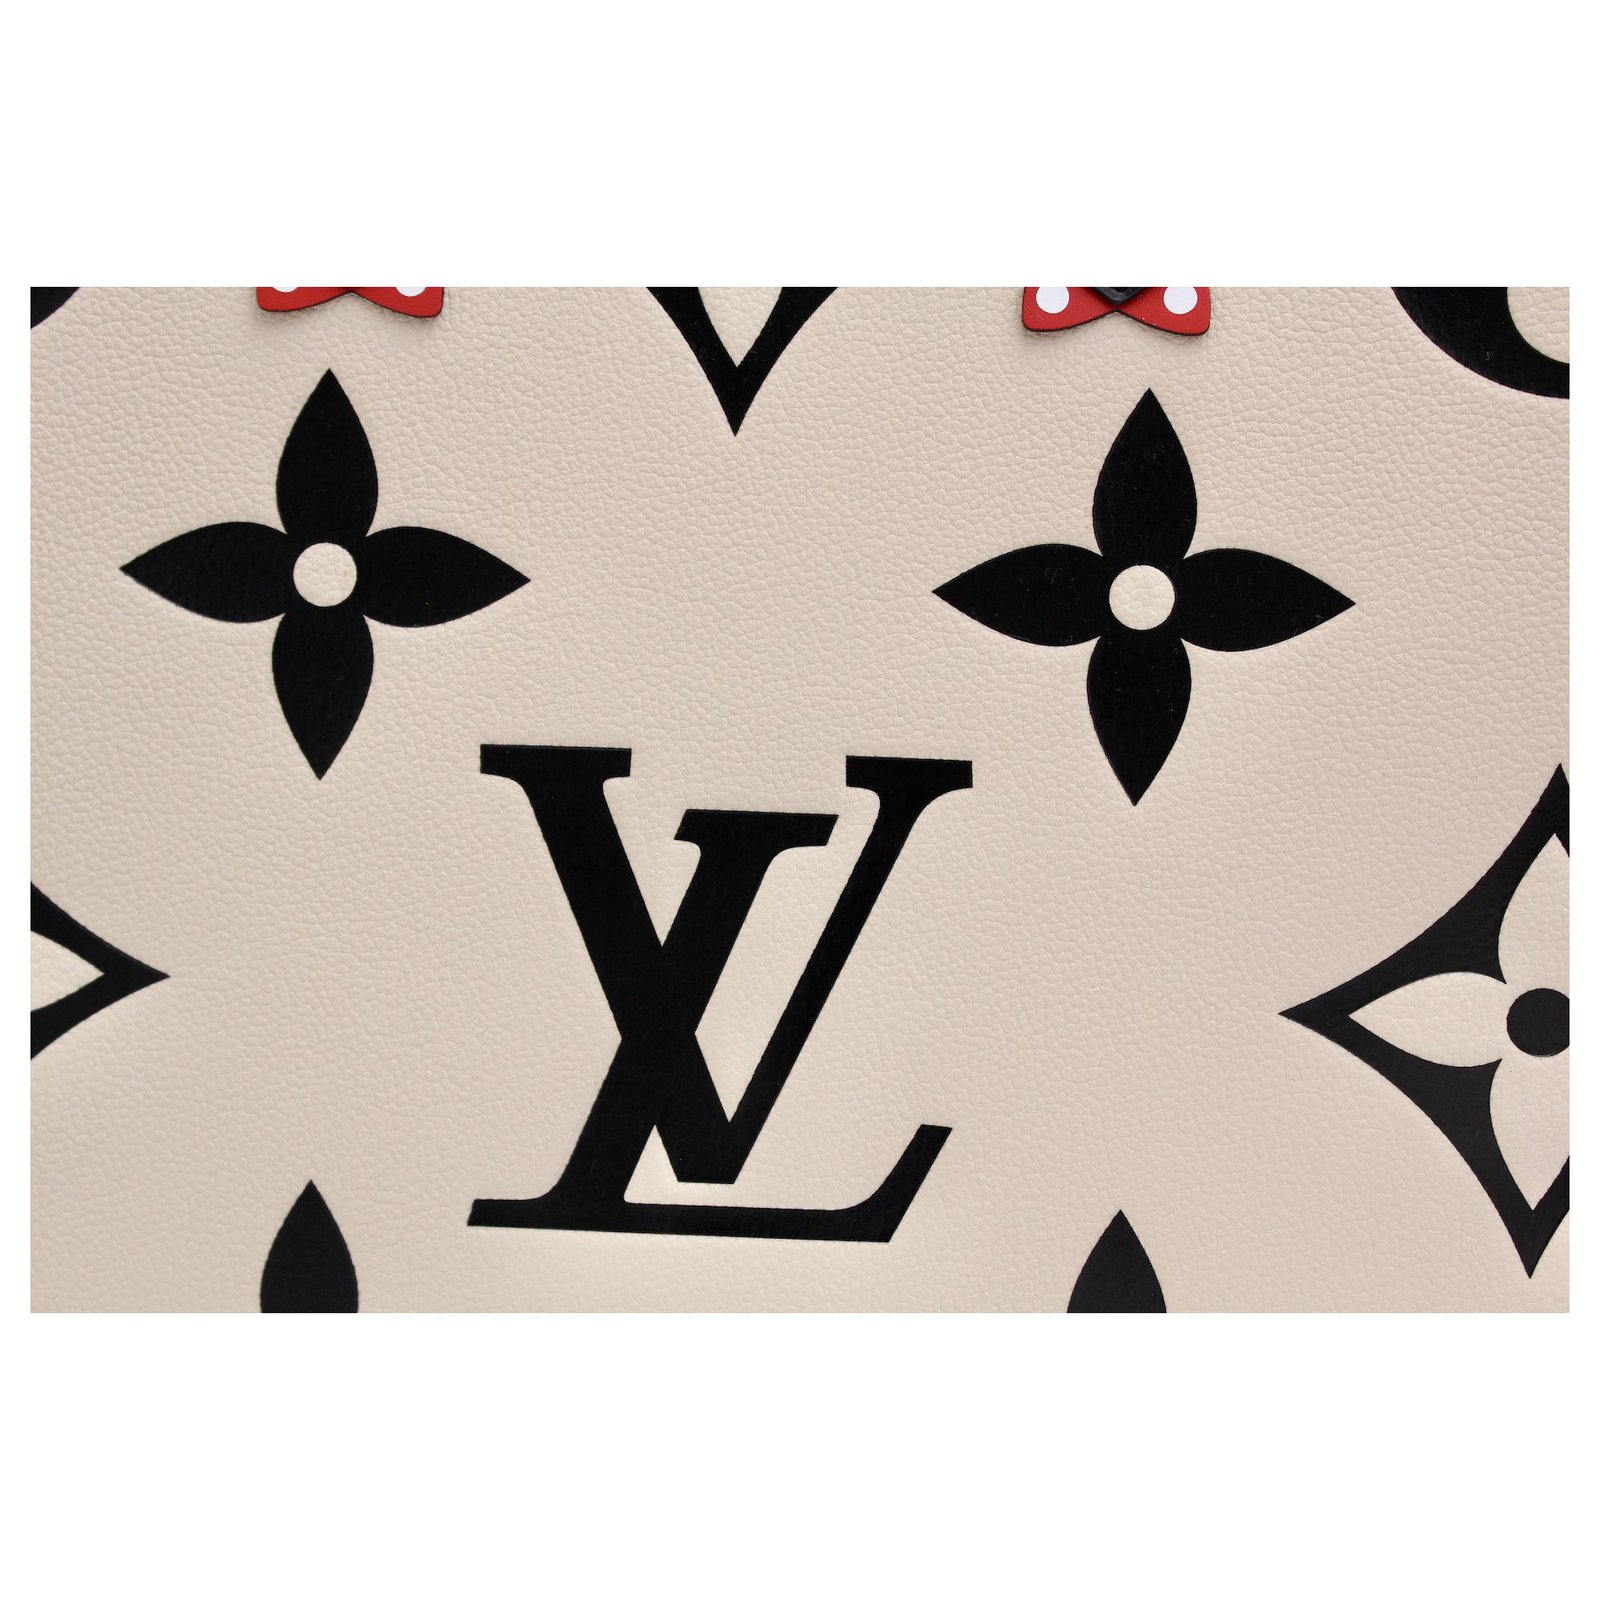  Louis Vuitton Wall Stickers